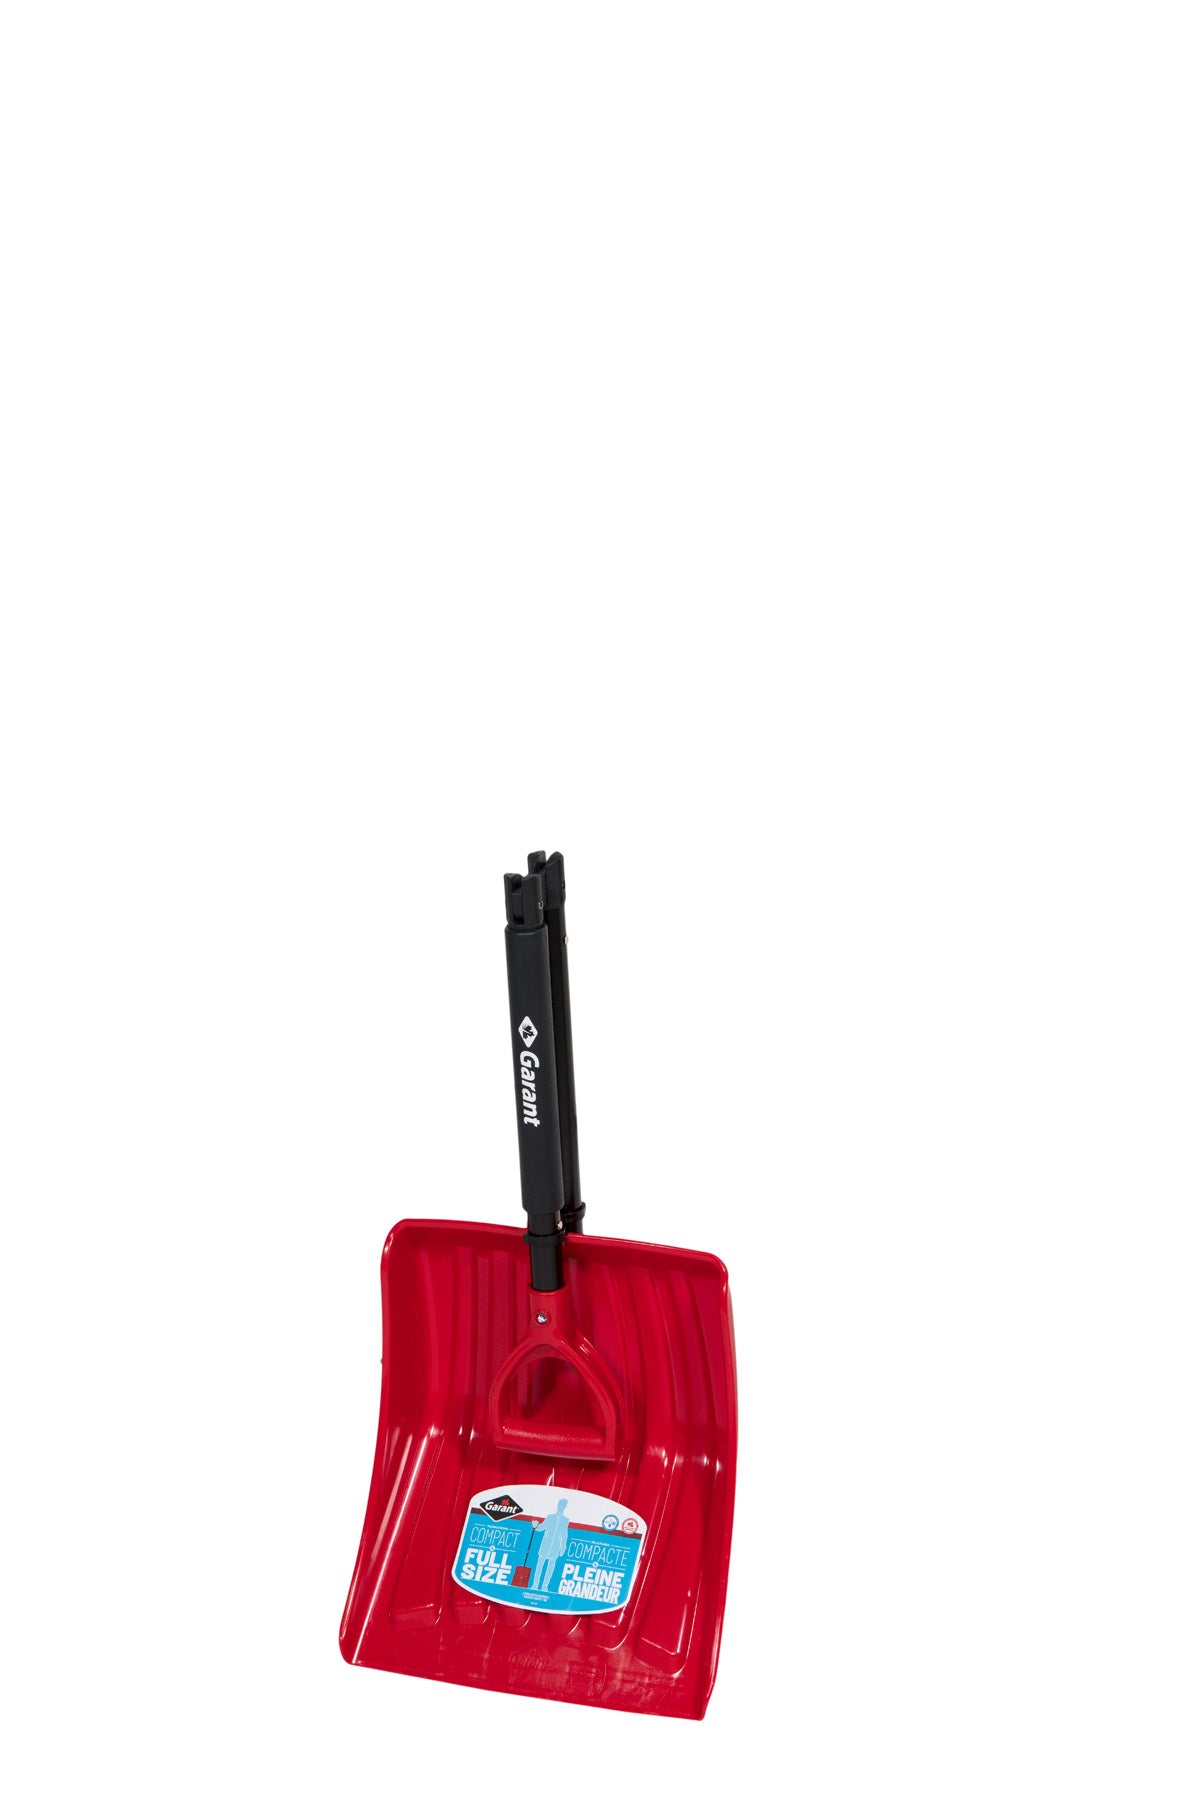 Foldable snow shovel,13.9 in. poly blade